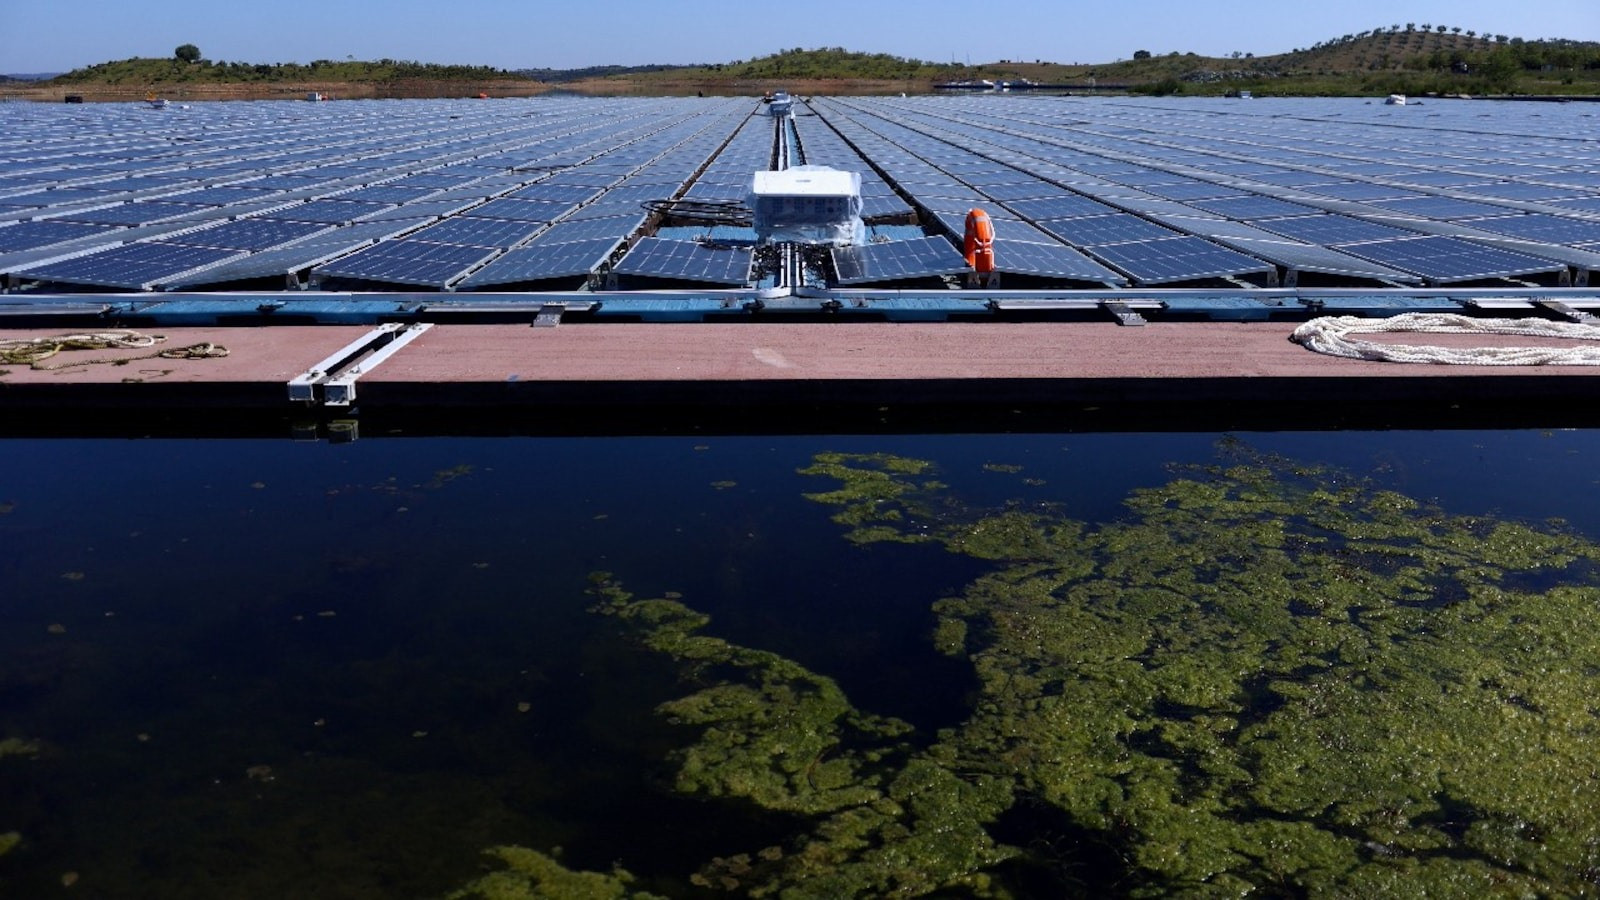 Portugal will launch the largest floating solar park in Europe